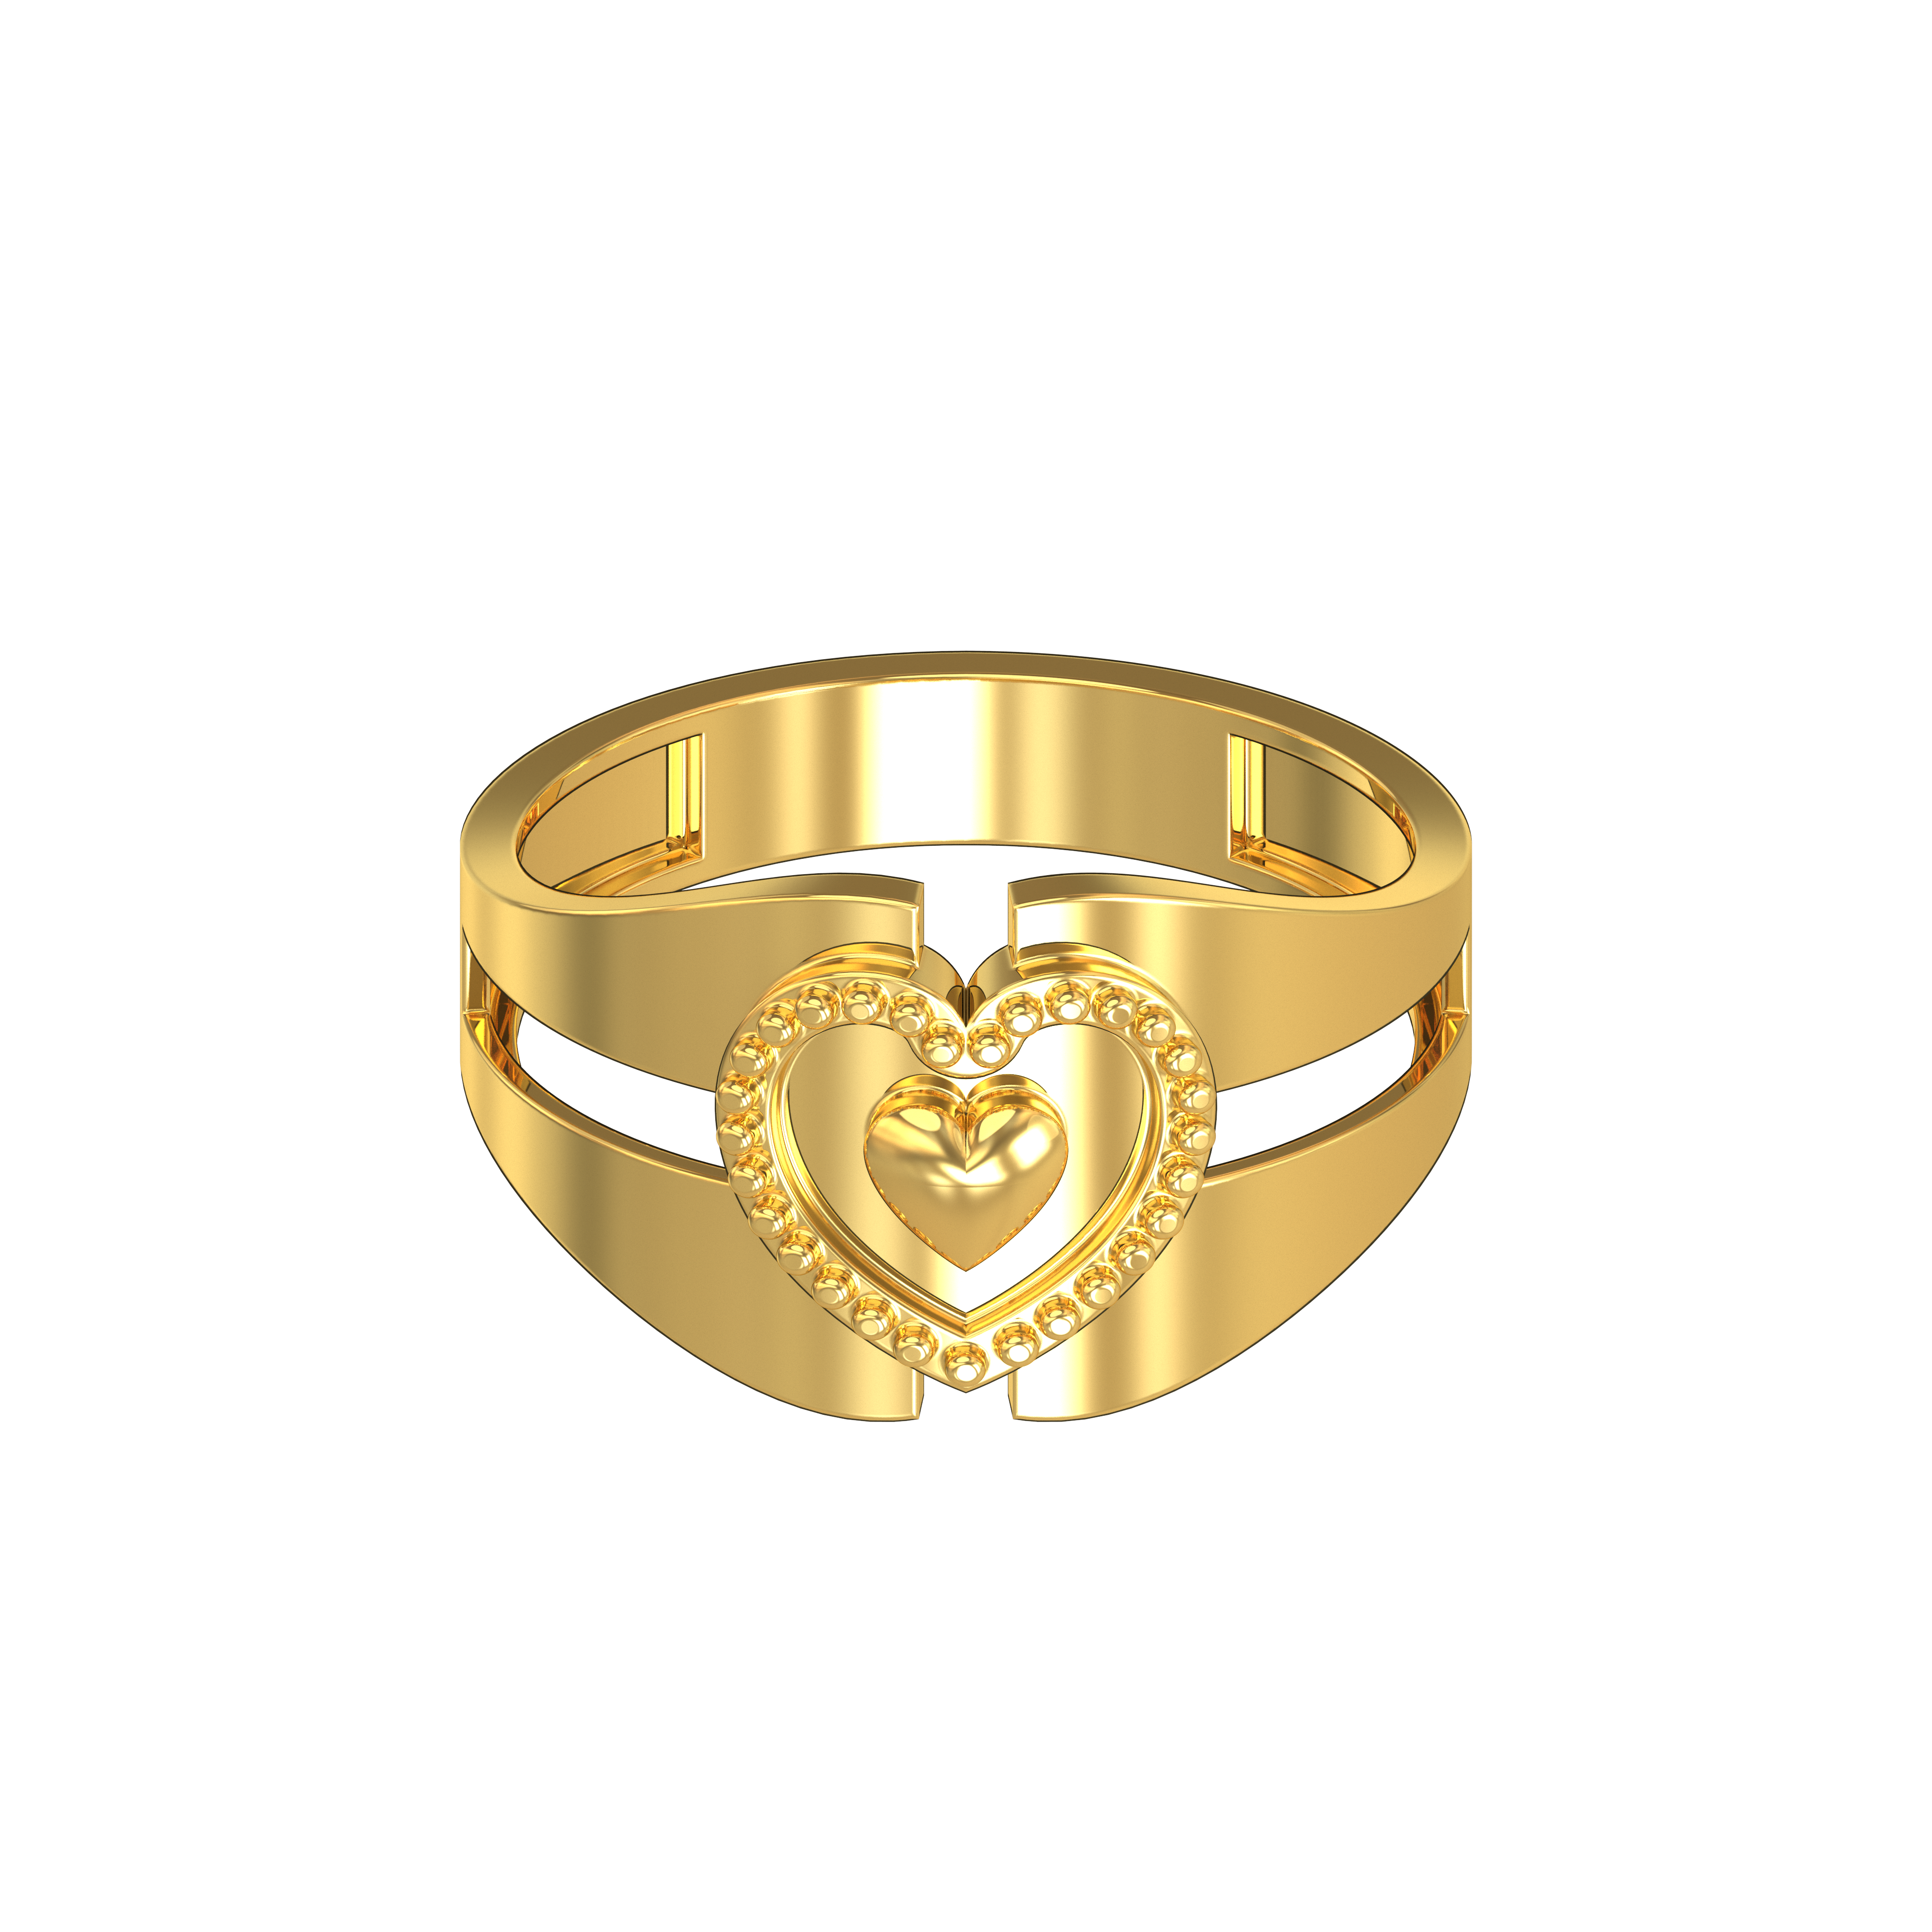 CANDERE - A KALYAN JEWELLERS COMPANY Men's Lightweight 18kt Band Ring  (Yellow, Gold) : Amazon.in: Jewellery